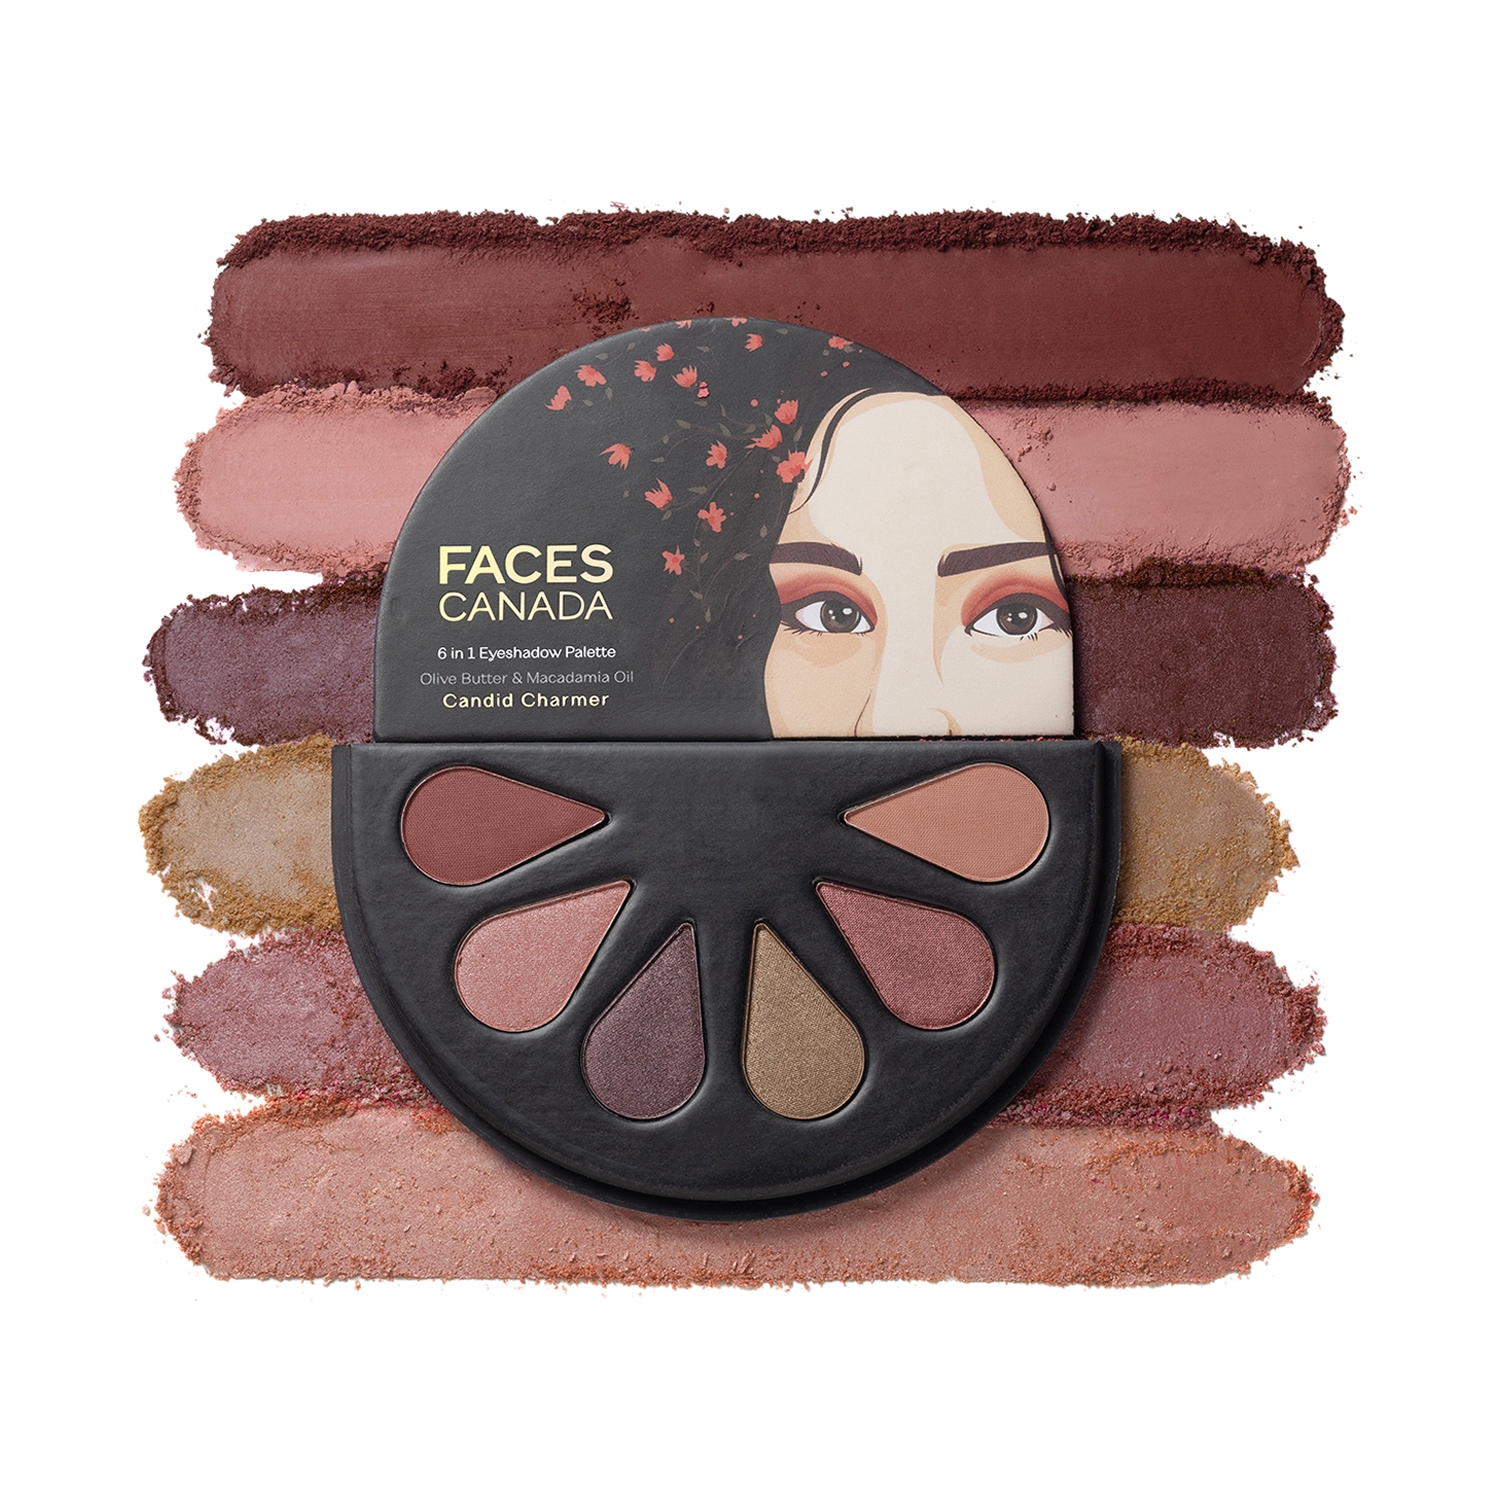 Faces Canada | Faces Canada 6-In-1 Eyeshadow Palette - 02 Candid Charmer (6g)